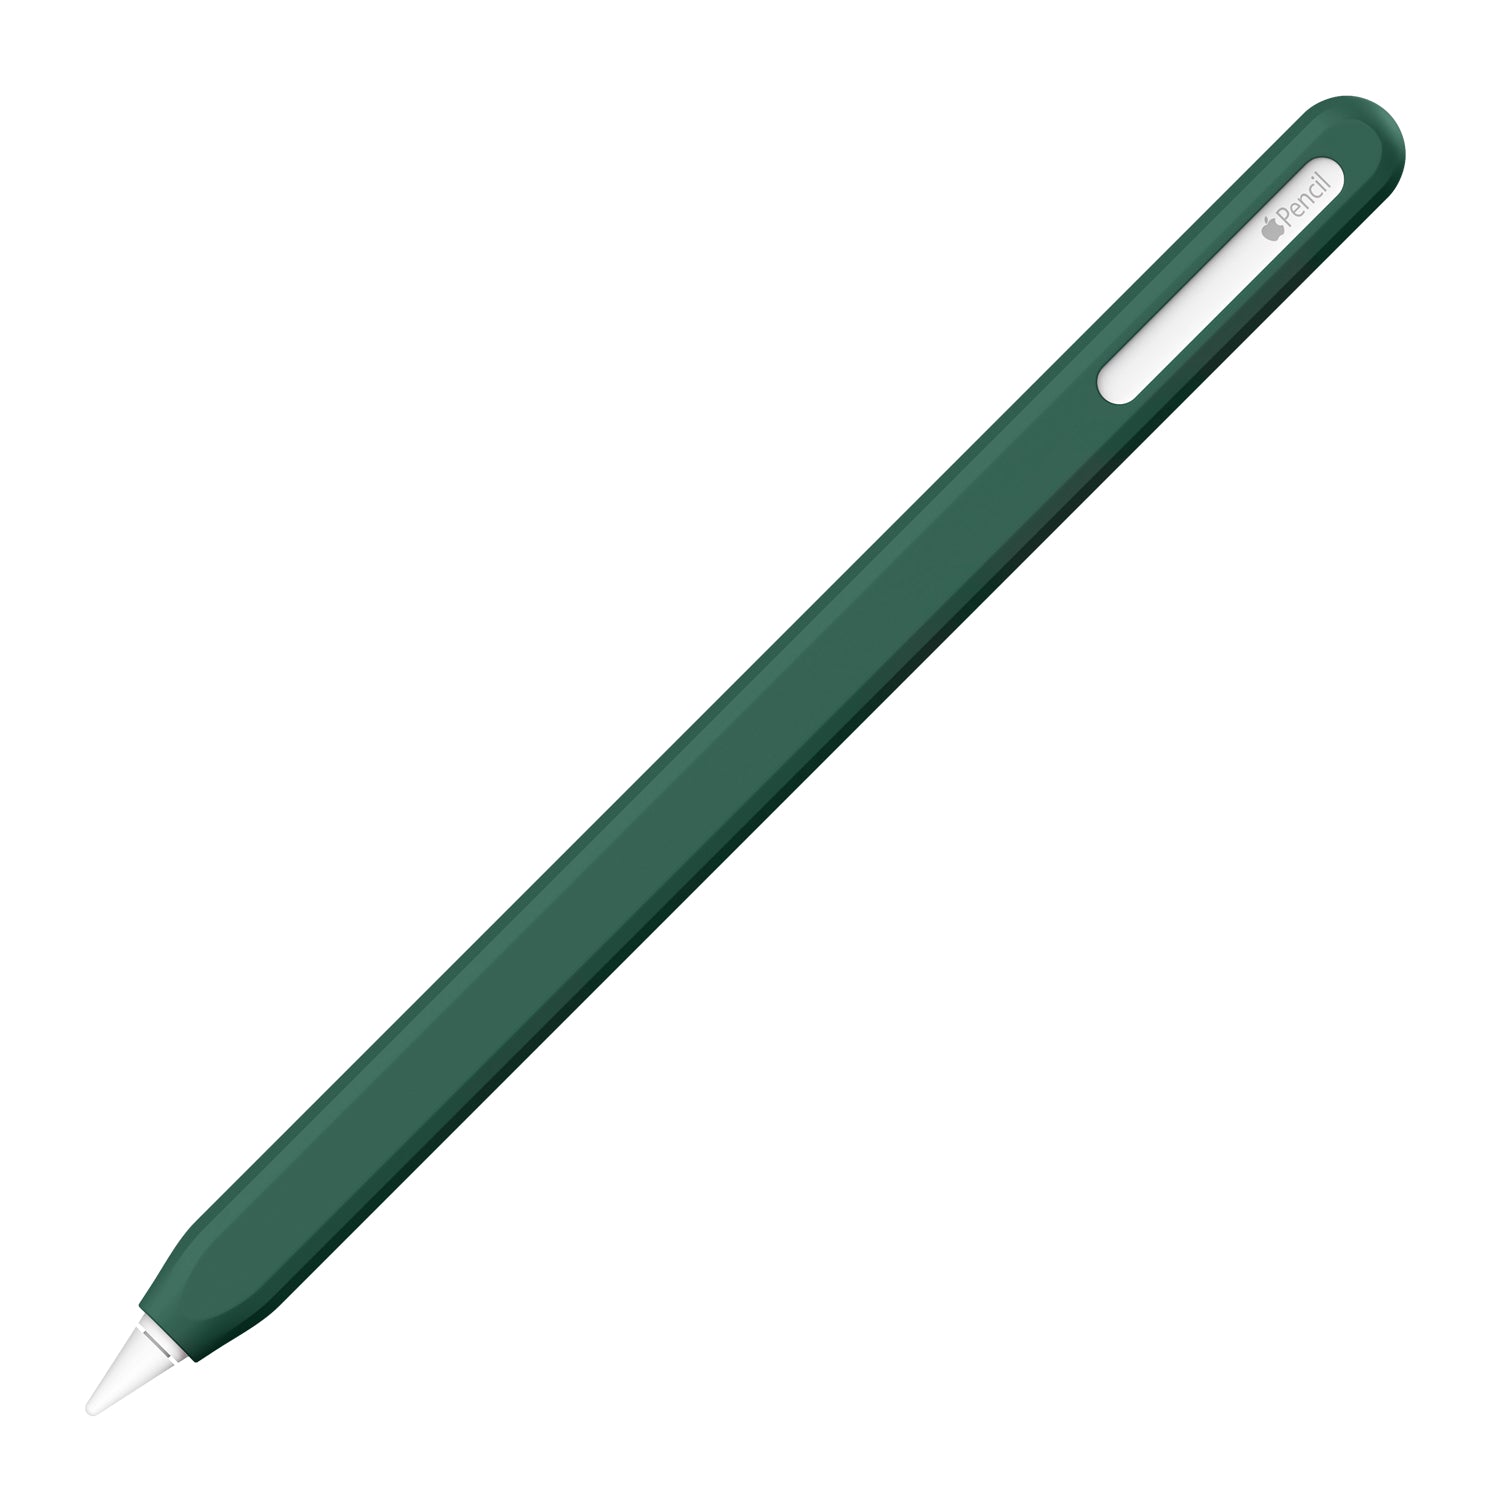 NimbleSleeve Silicone Protective Sleeve for Apple Pencil 2nd Generation